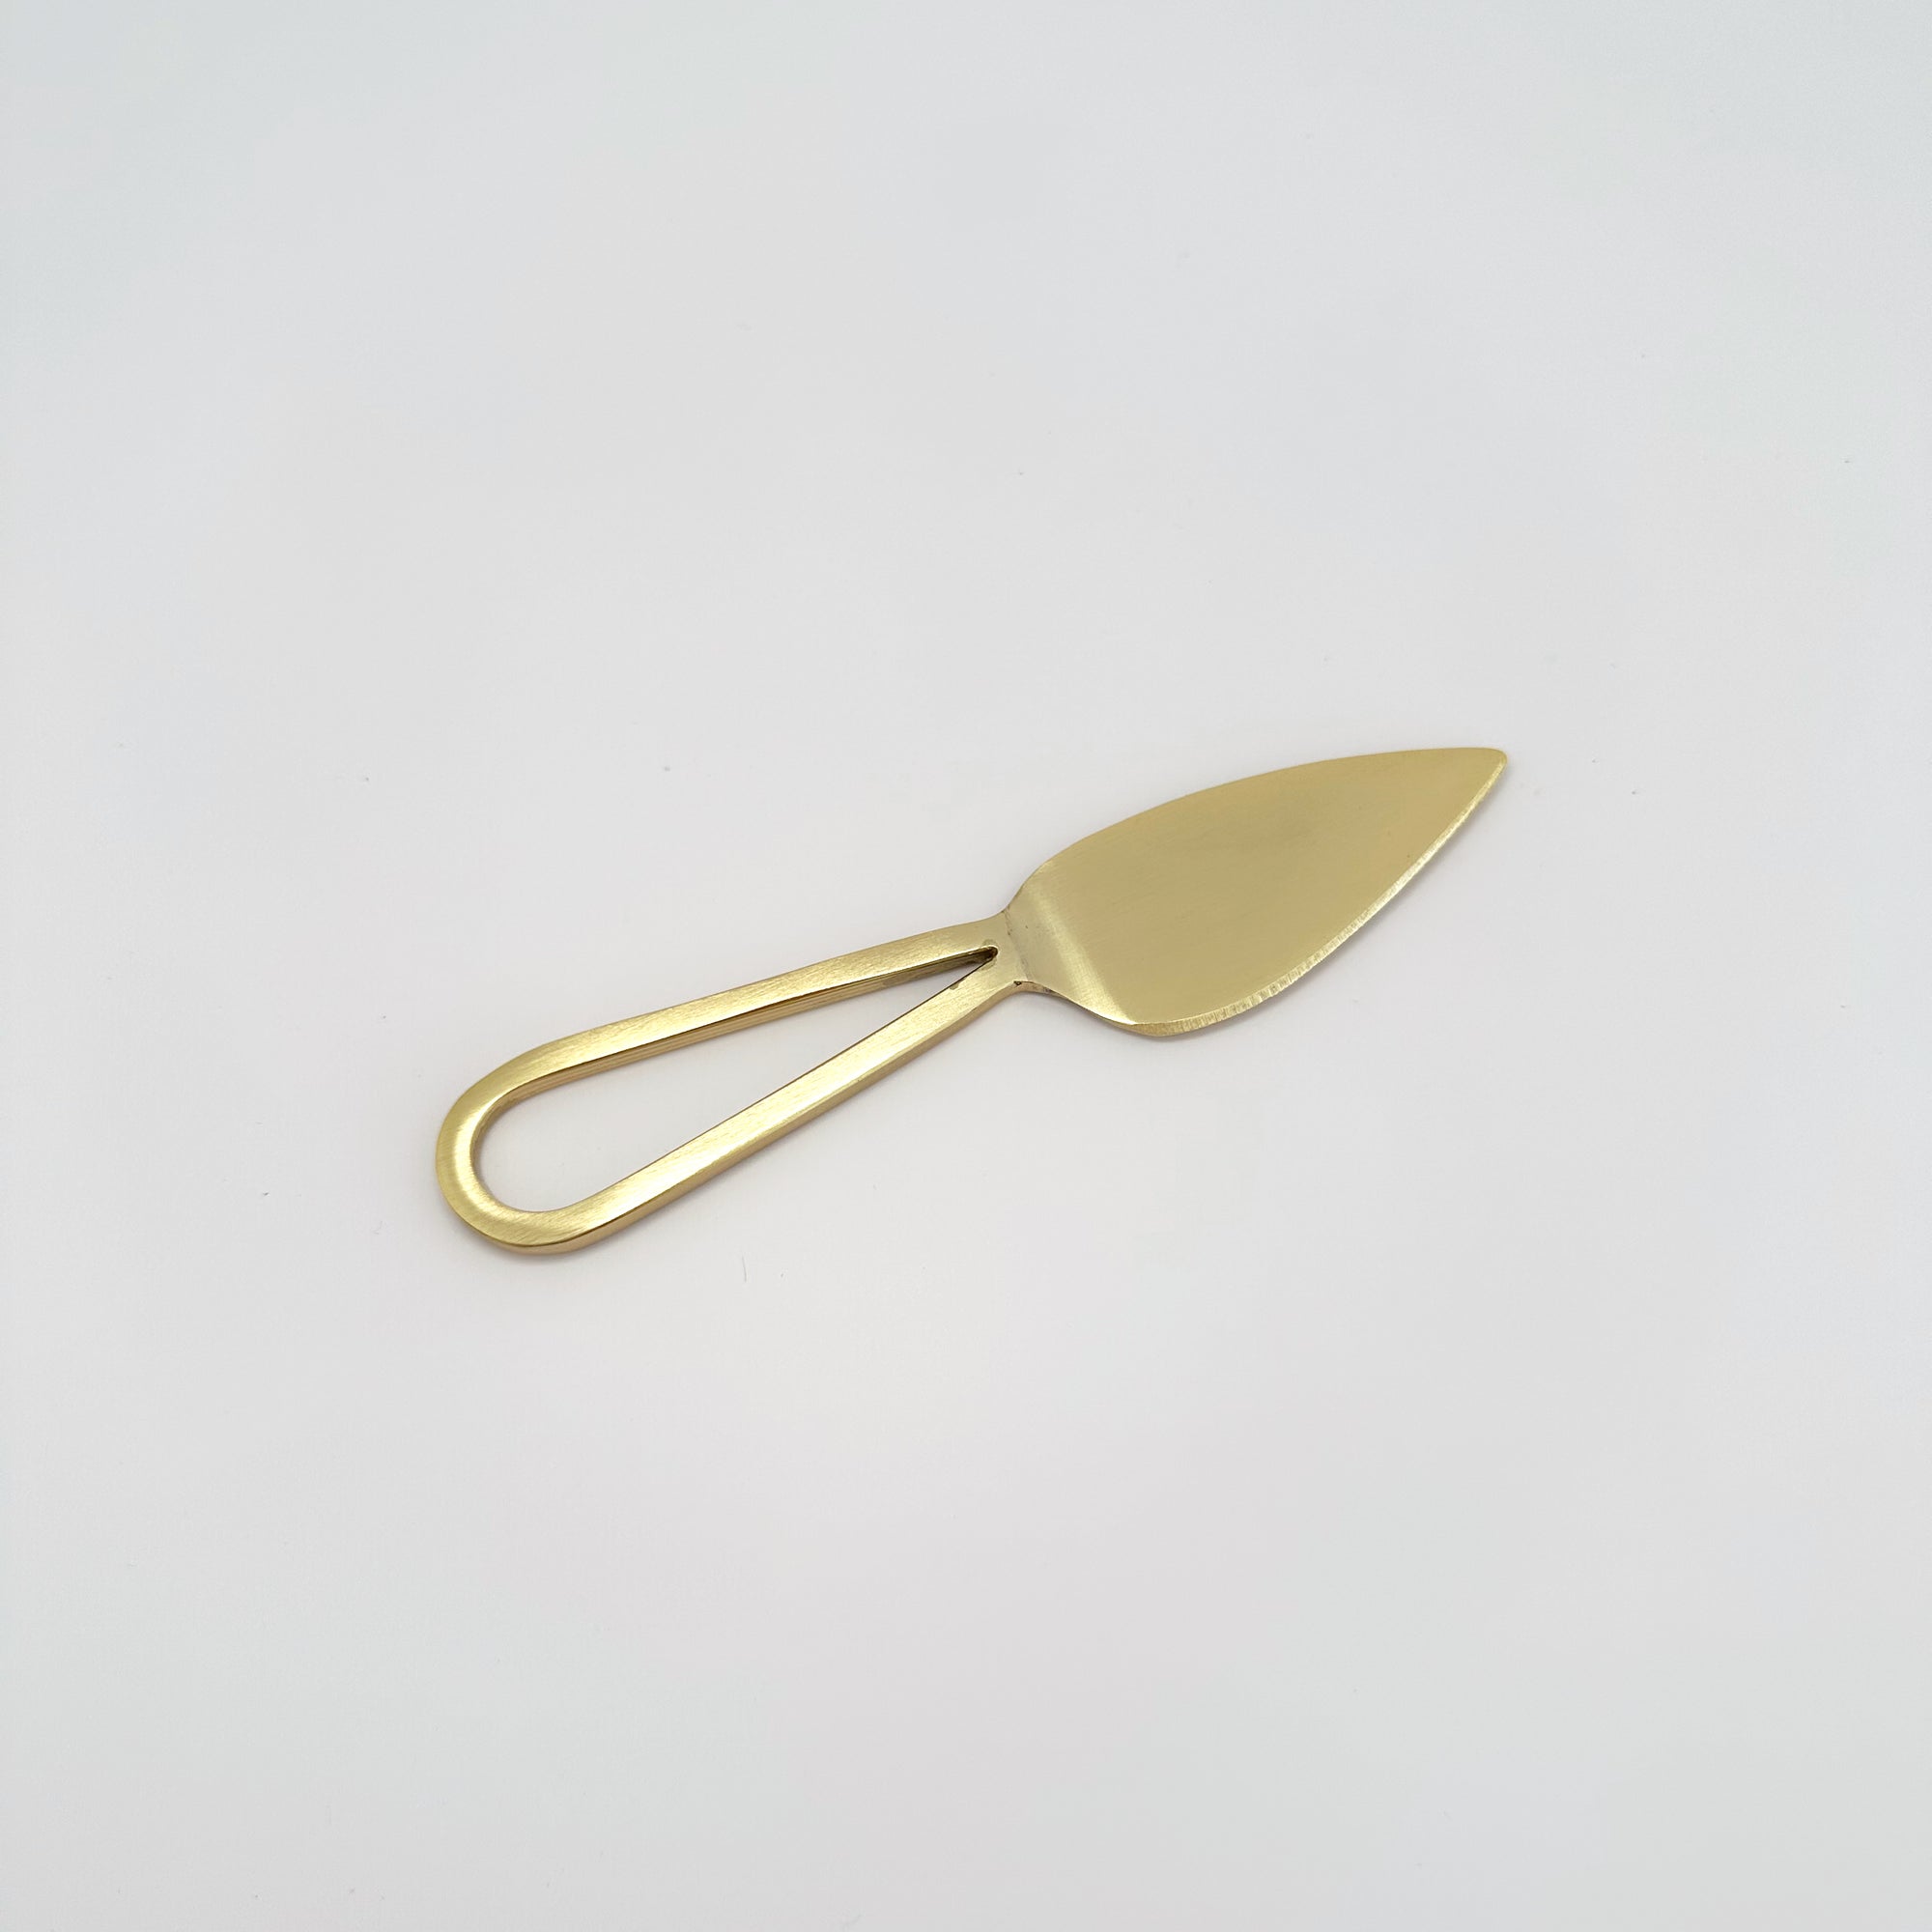 AURIC CHEESE KNIFE: GOLD